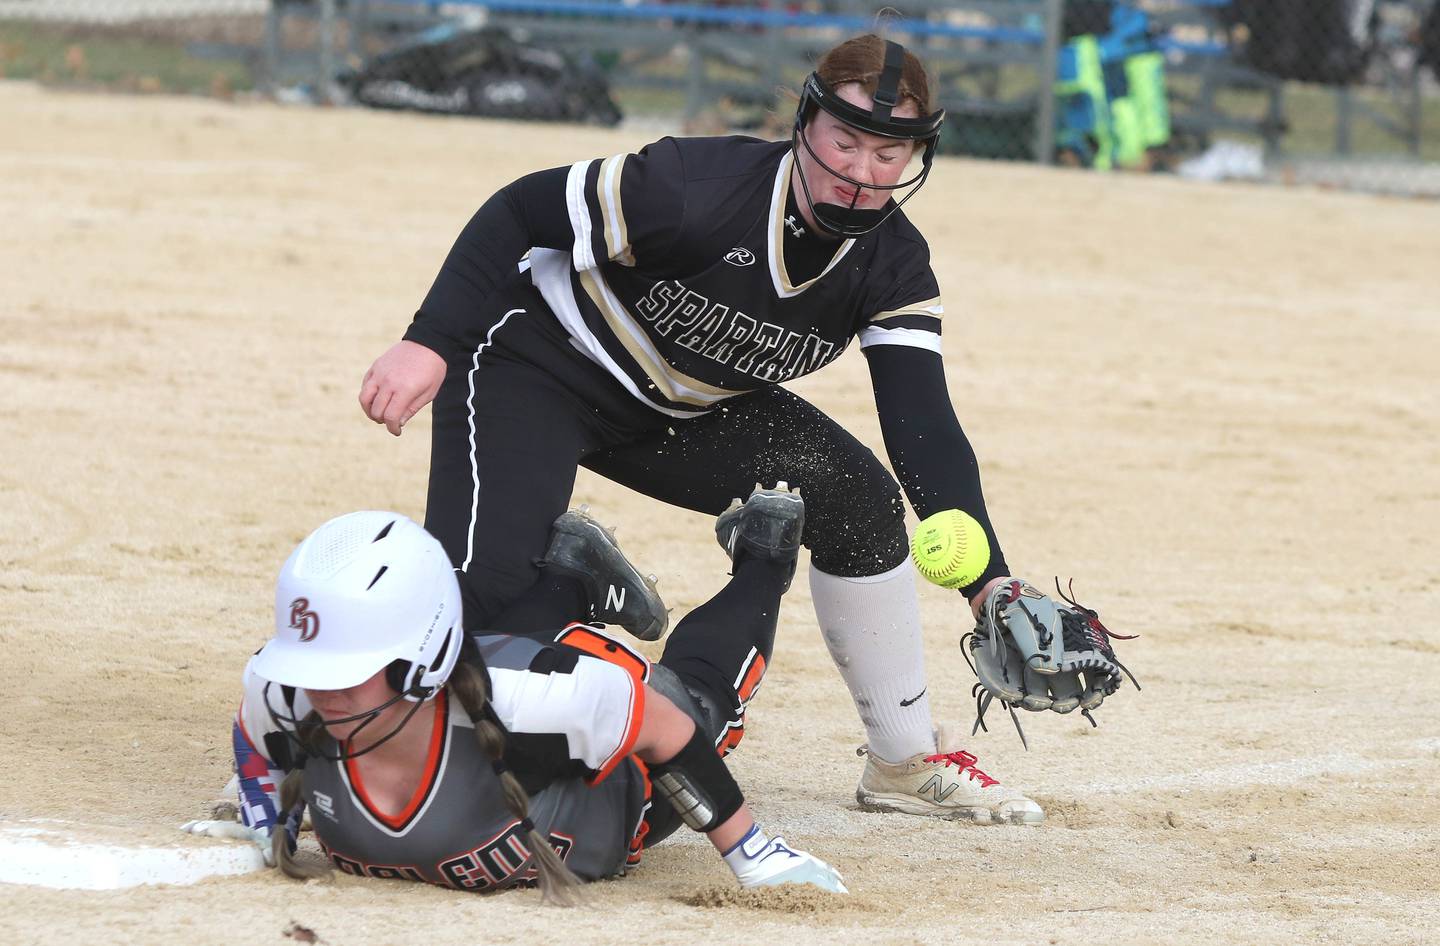 Sycamore third baseman Paige Collie takes a throw as a Harlem baserunner slides back safely during their game Friday, March 25, 2022, at the Sycamore Community Sports Complex.